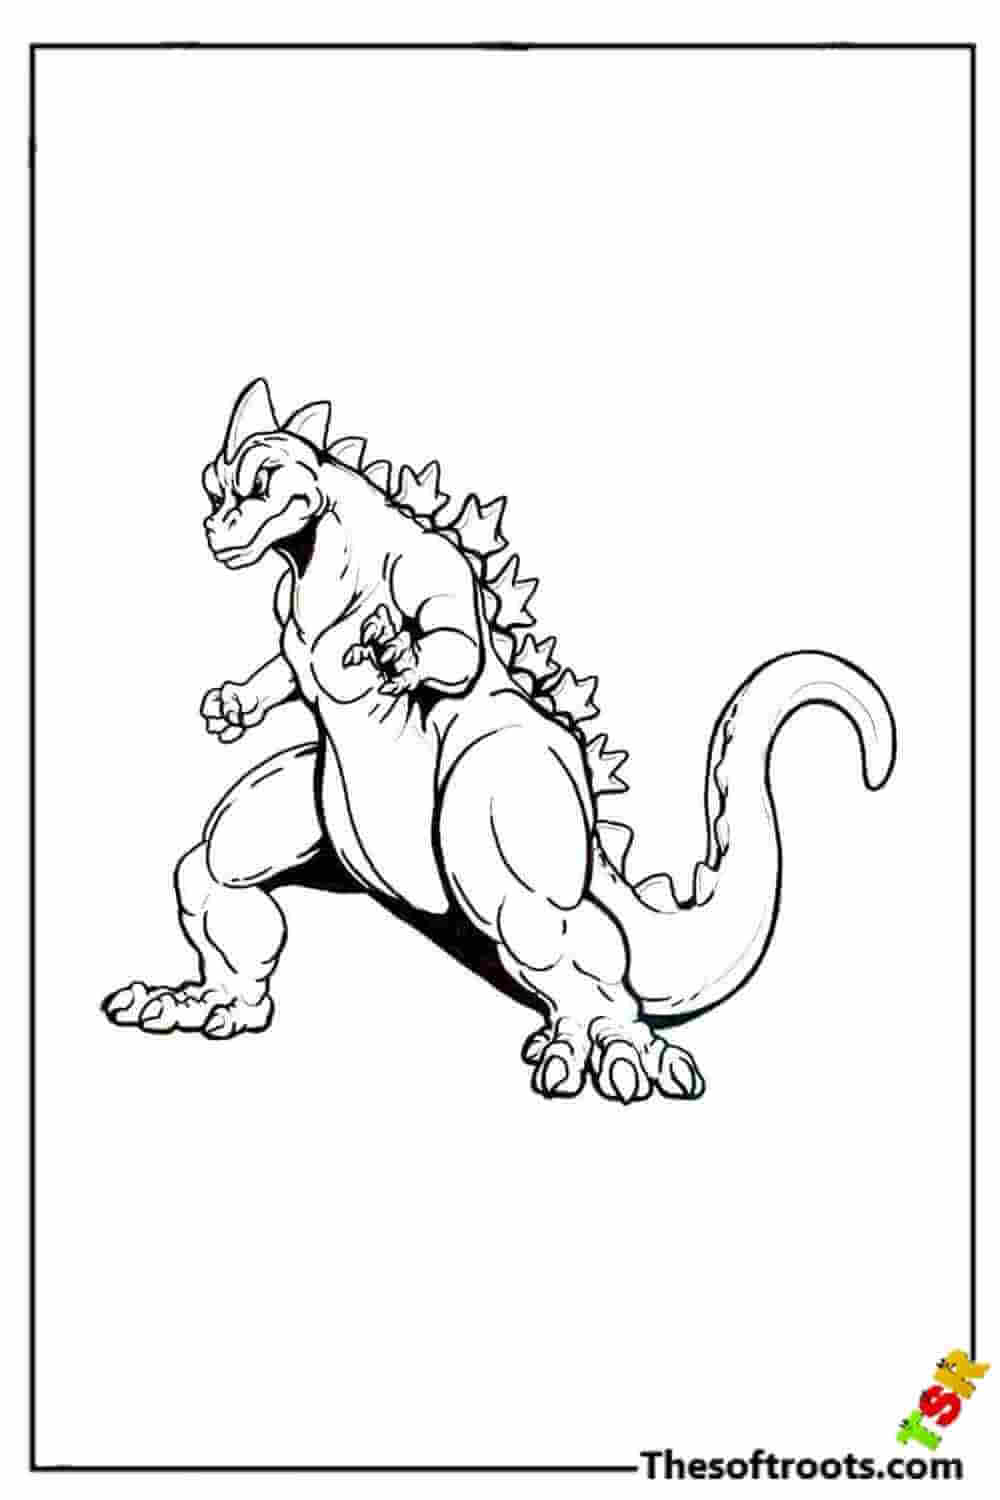 Animated Godzilla coloring pages